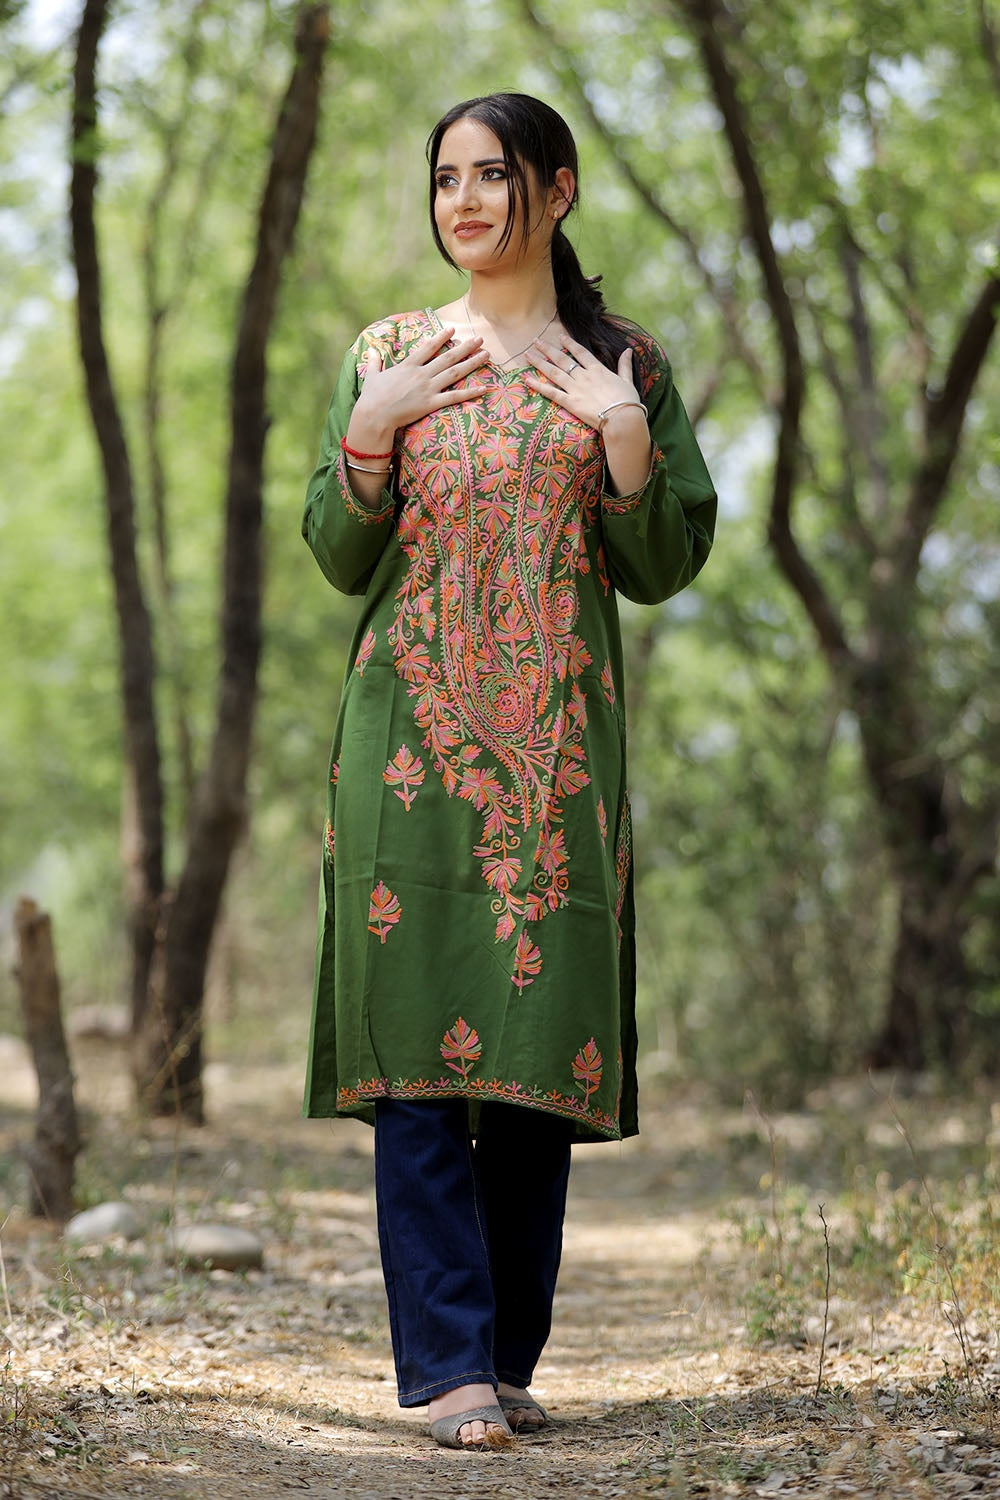 Comfortable Mehndi Color Embroidered Design Long Sleeve Kurti For Ladies  Bust Size: 28-30-32 Inch (in) at Best Price in Bareilly | Meenakshi Traders